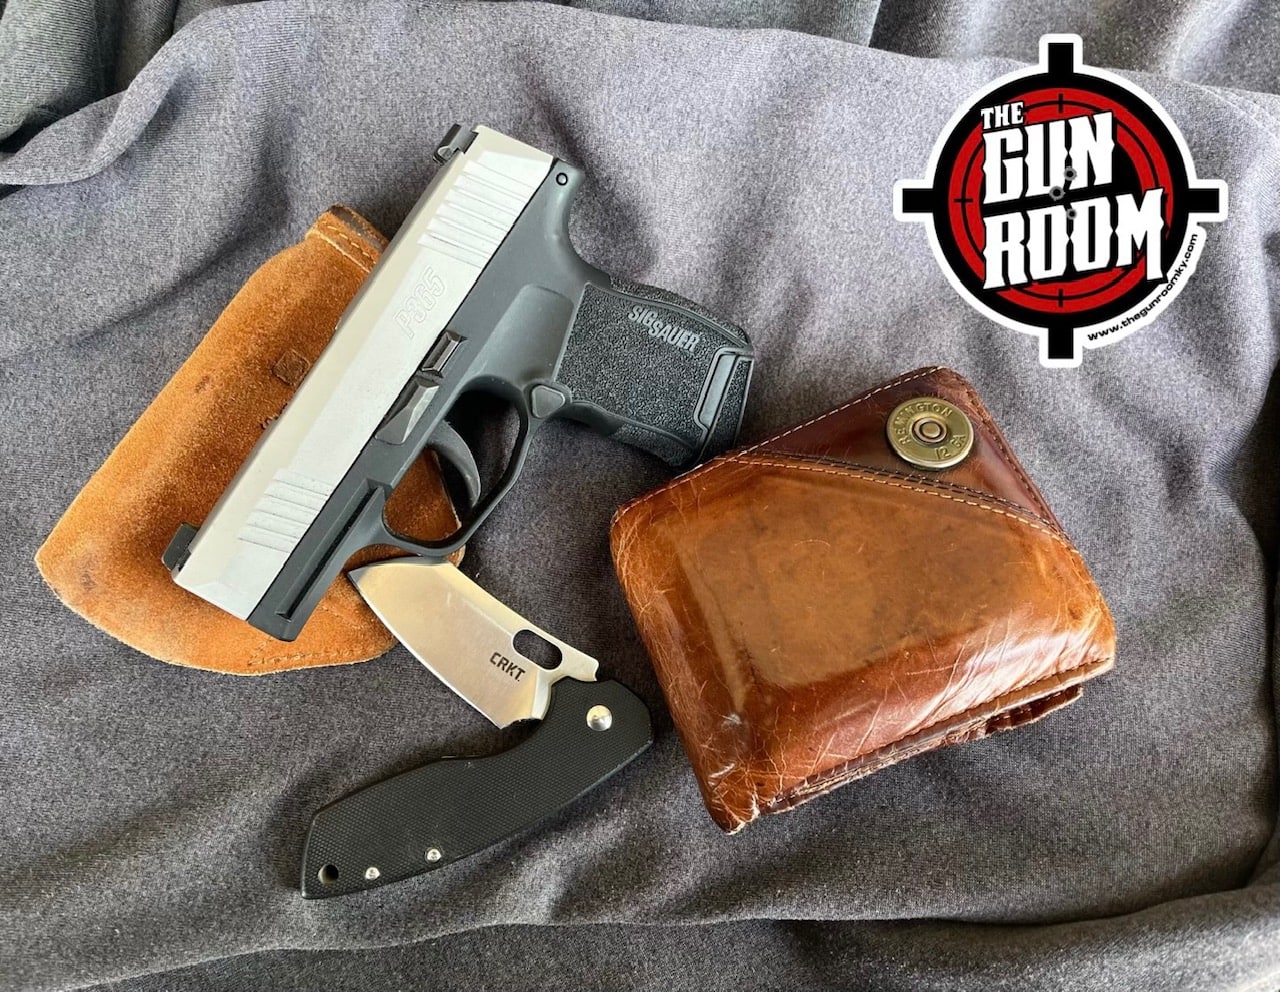 Discover The Gun Room: Your #1 Destination for Affordable Firearms, Accessories, Knives, and Optics 5 RDA Pic EDC jpg